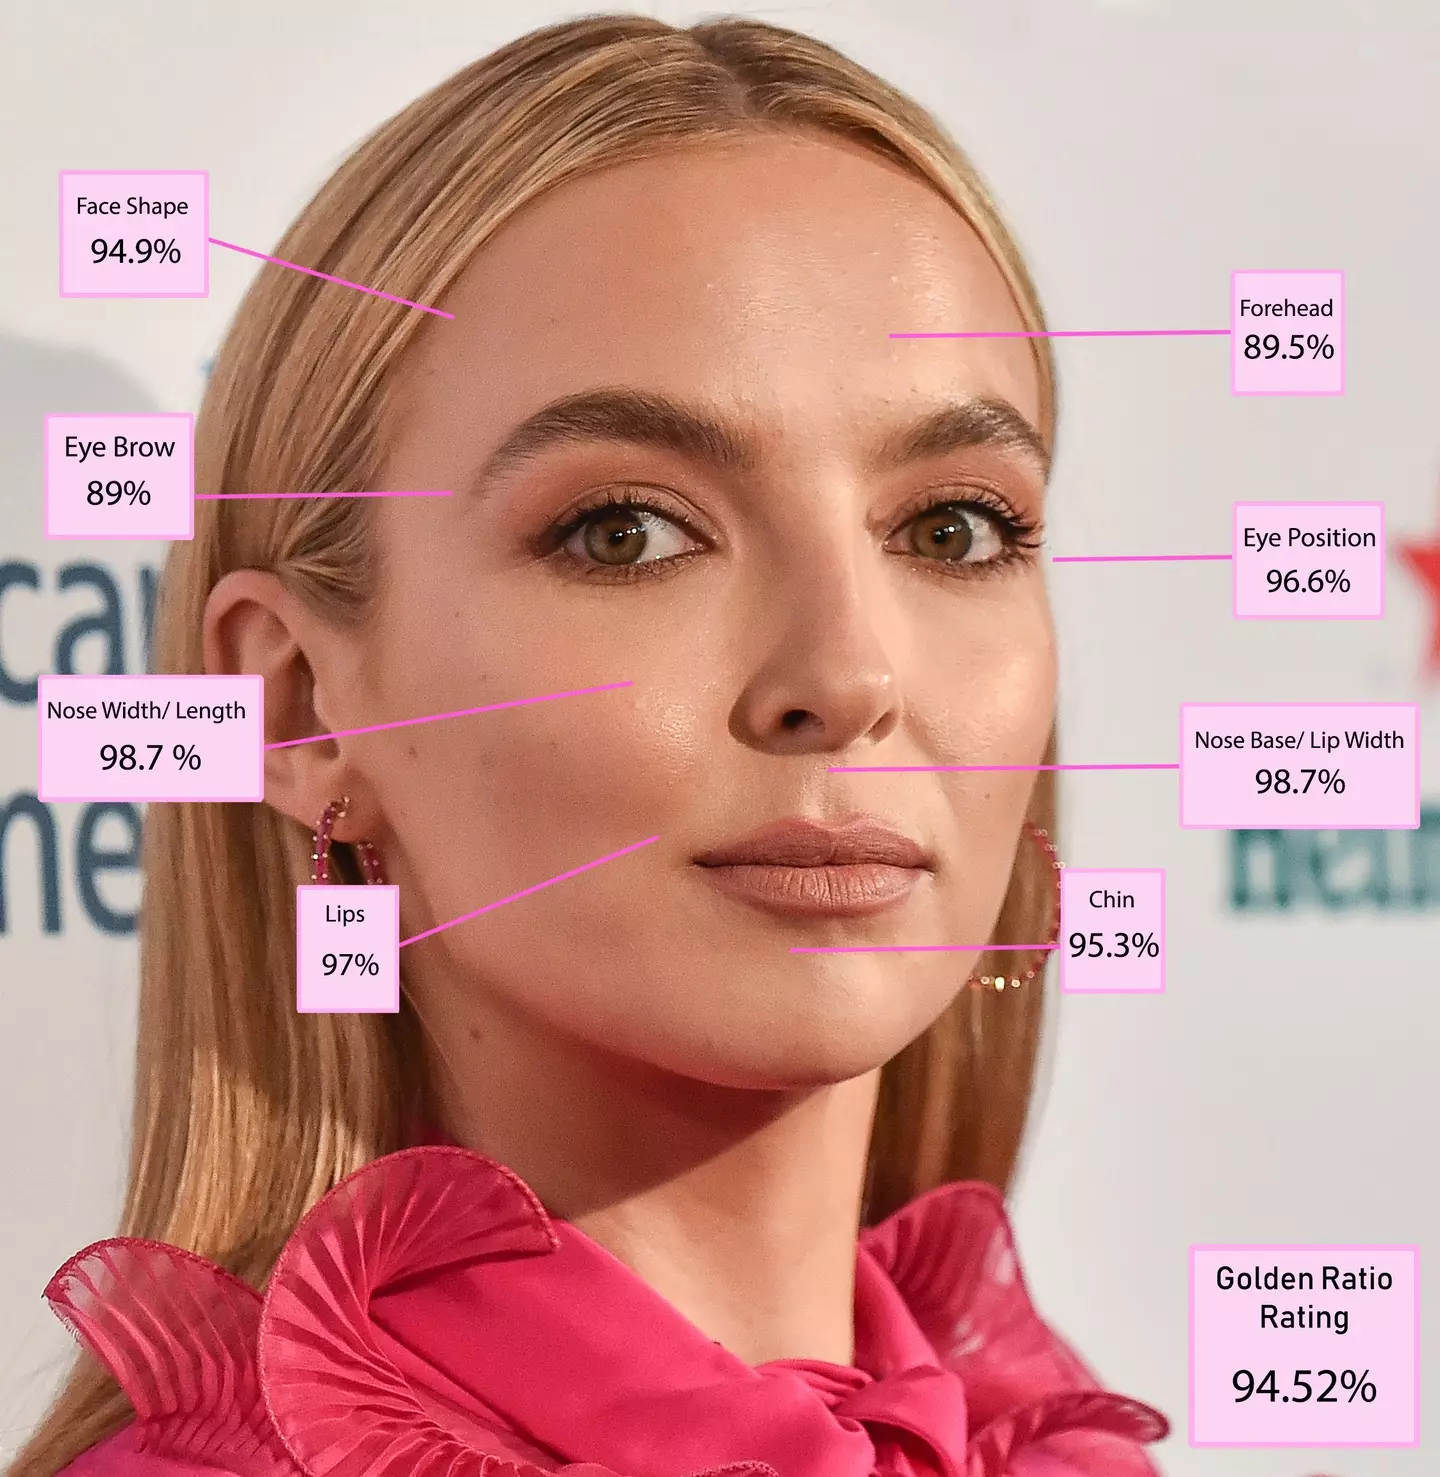 The Killing Eve star was found to be 94.52% accurate to the physical perfection calculation.